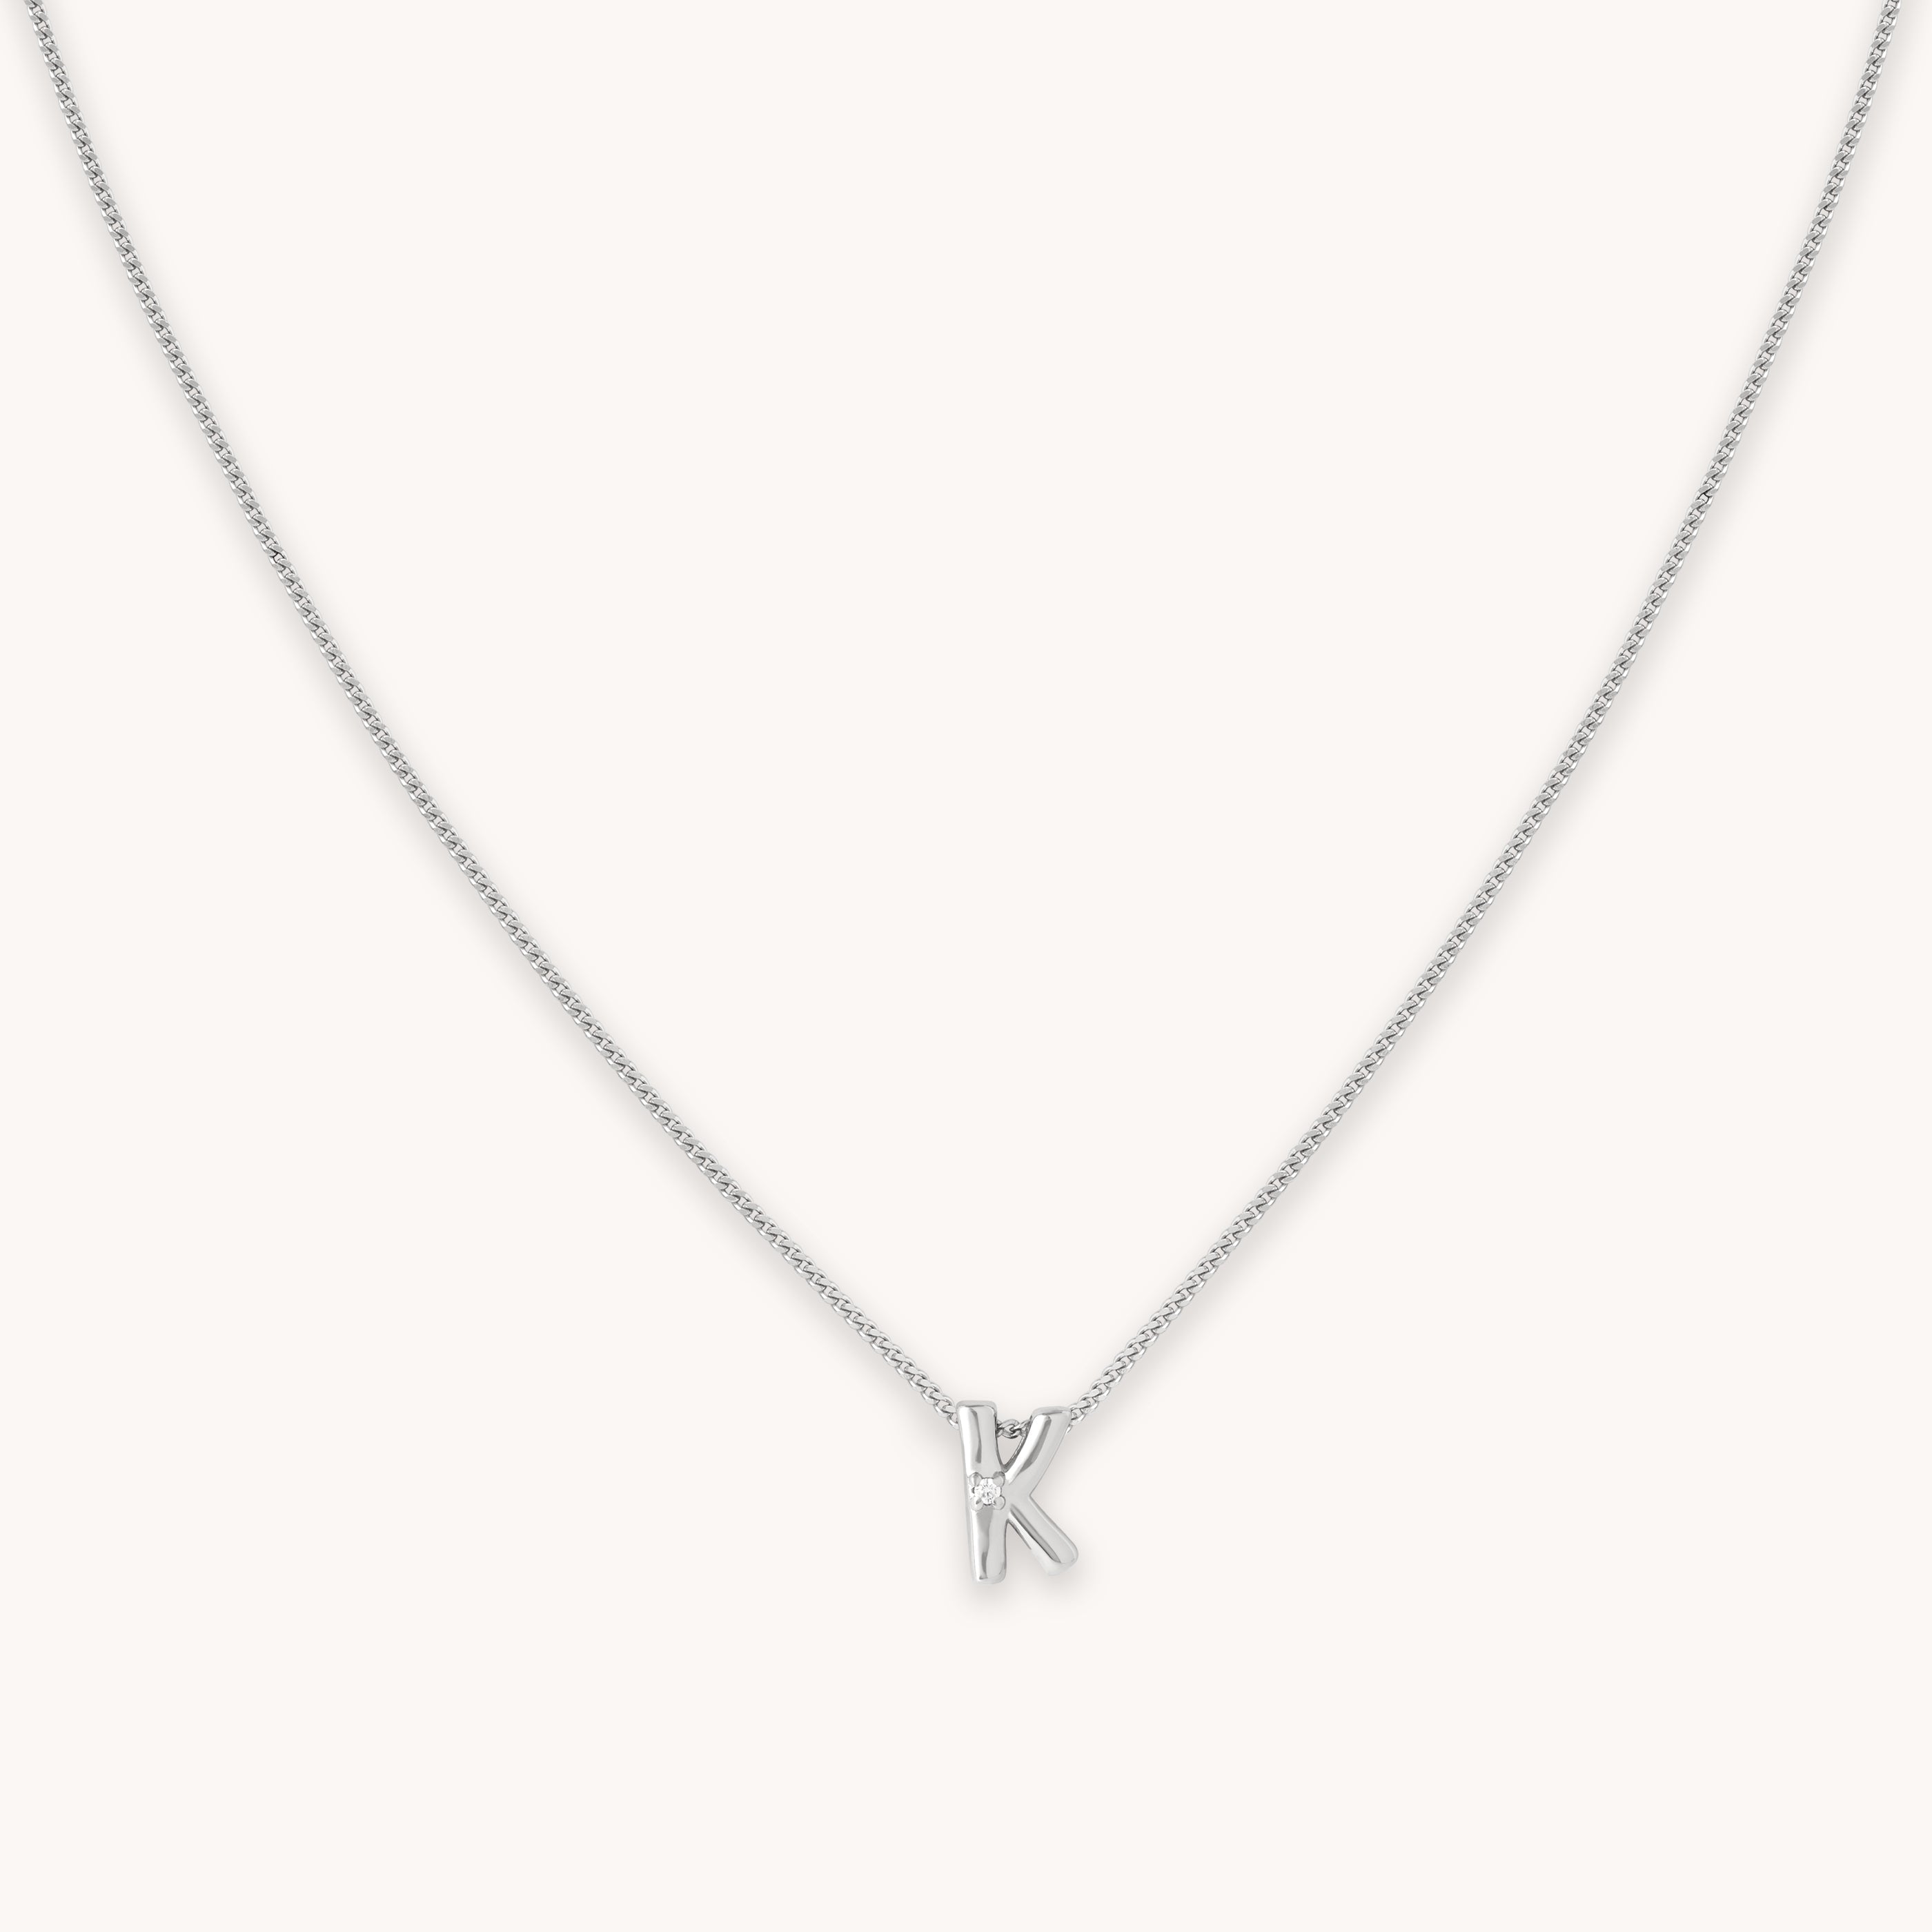 K Initial Pendant Necklace in Silver